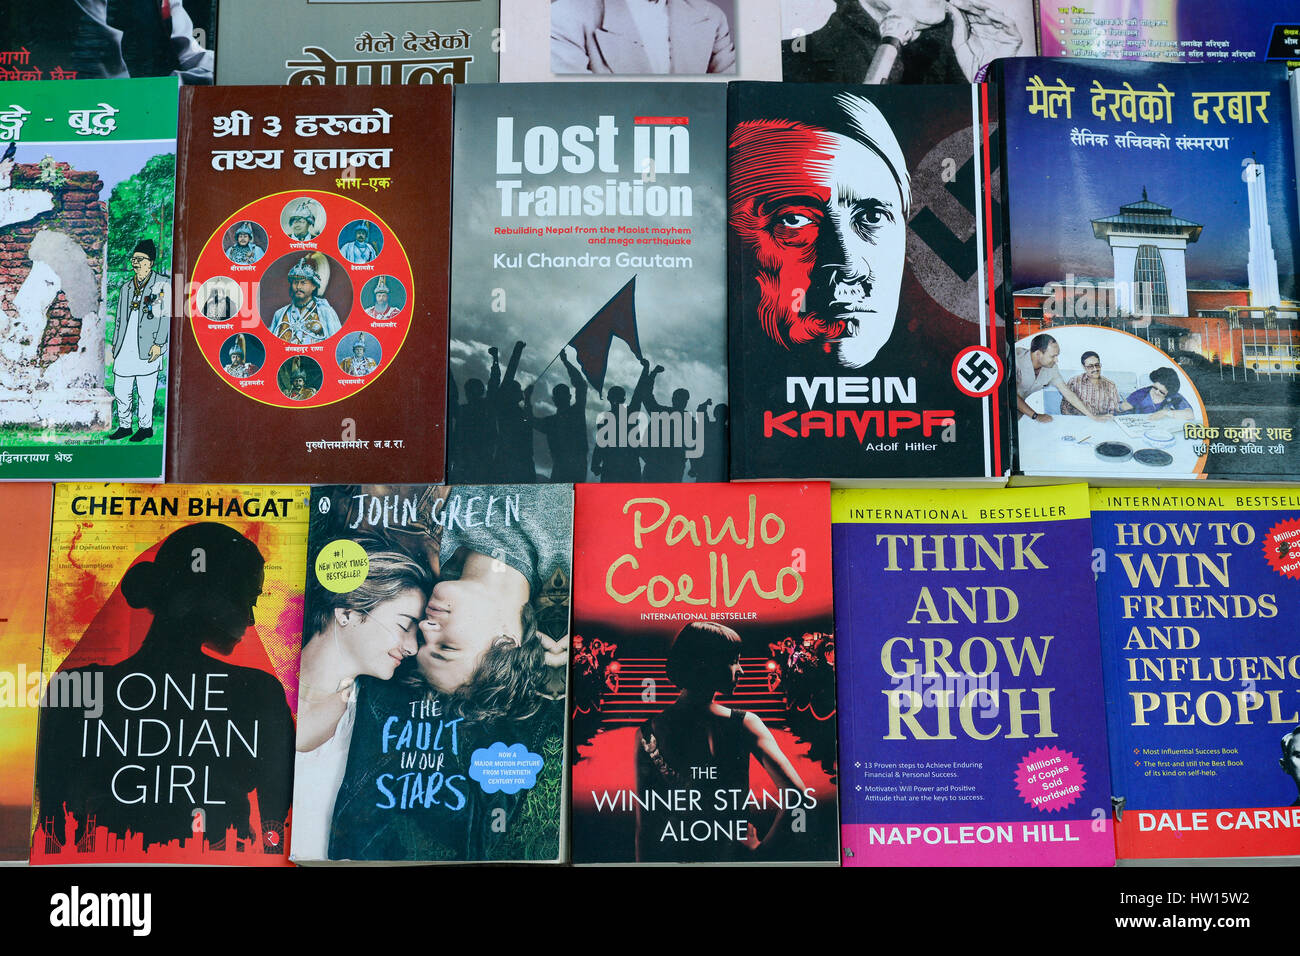 NEPAL Kathmandu, book seller on street, selling Nazi book of Adolf Hitler 'Mein Kampf' my struggle beside Paul Coelho, John Green, Think and grow rich, Lost in Transition and other books Stock Photo